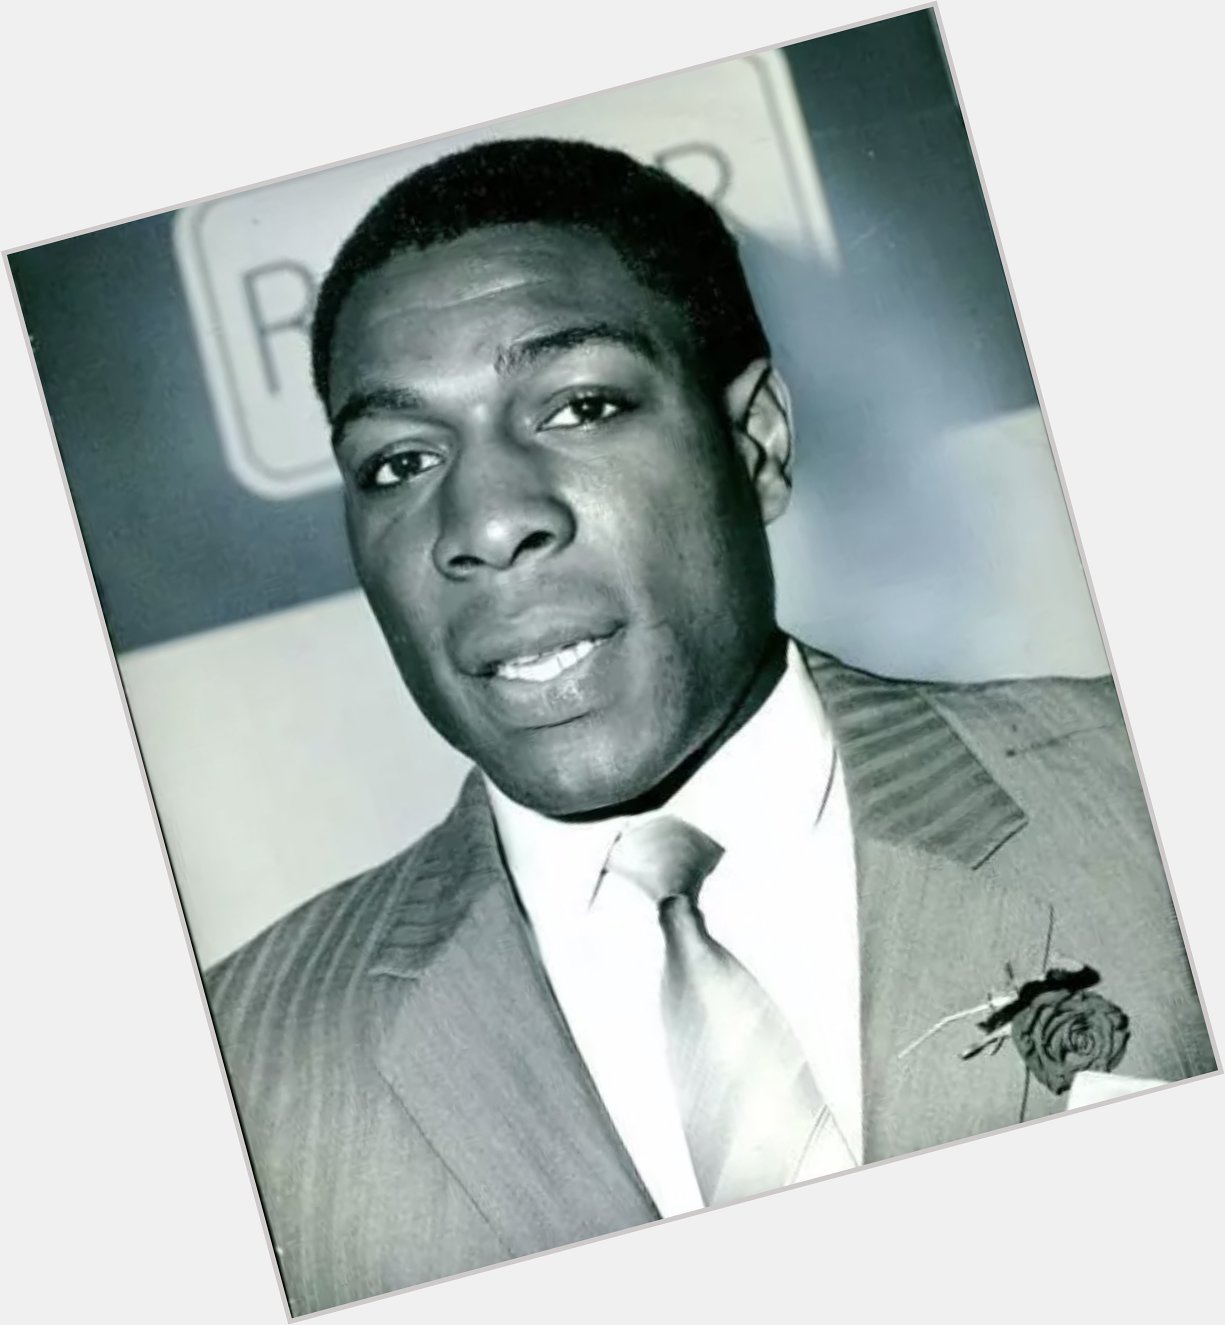 Happy 60th Birthday to our iconic former heavyweight champ Frank Bruno. A true legend of British boxing!!! 